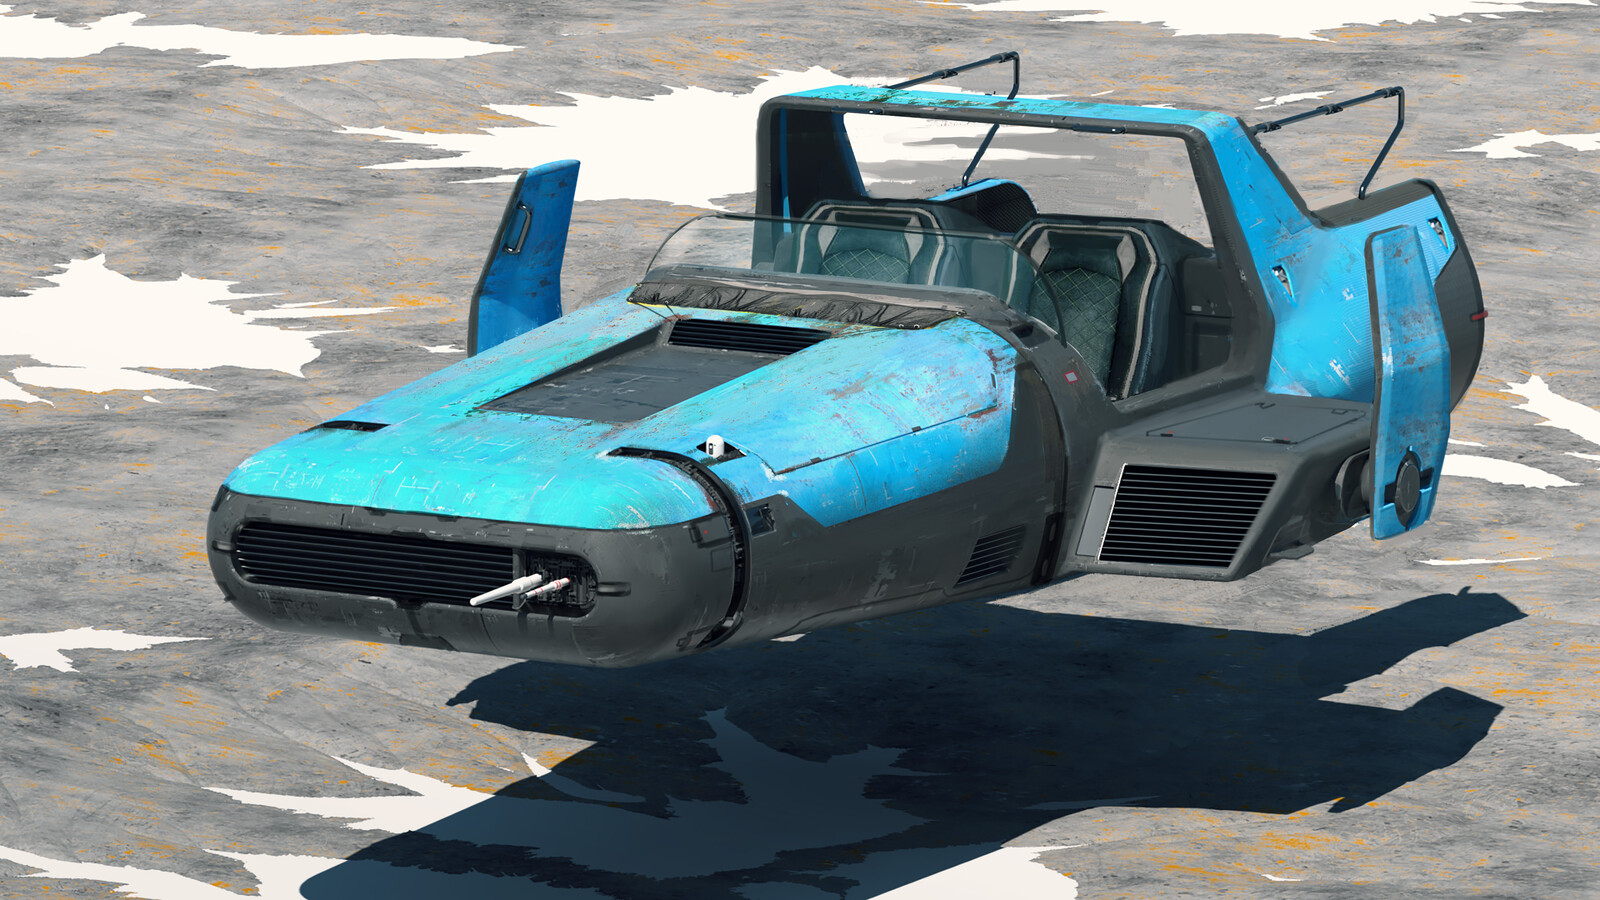 Final concept of the Hover car